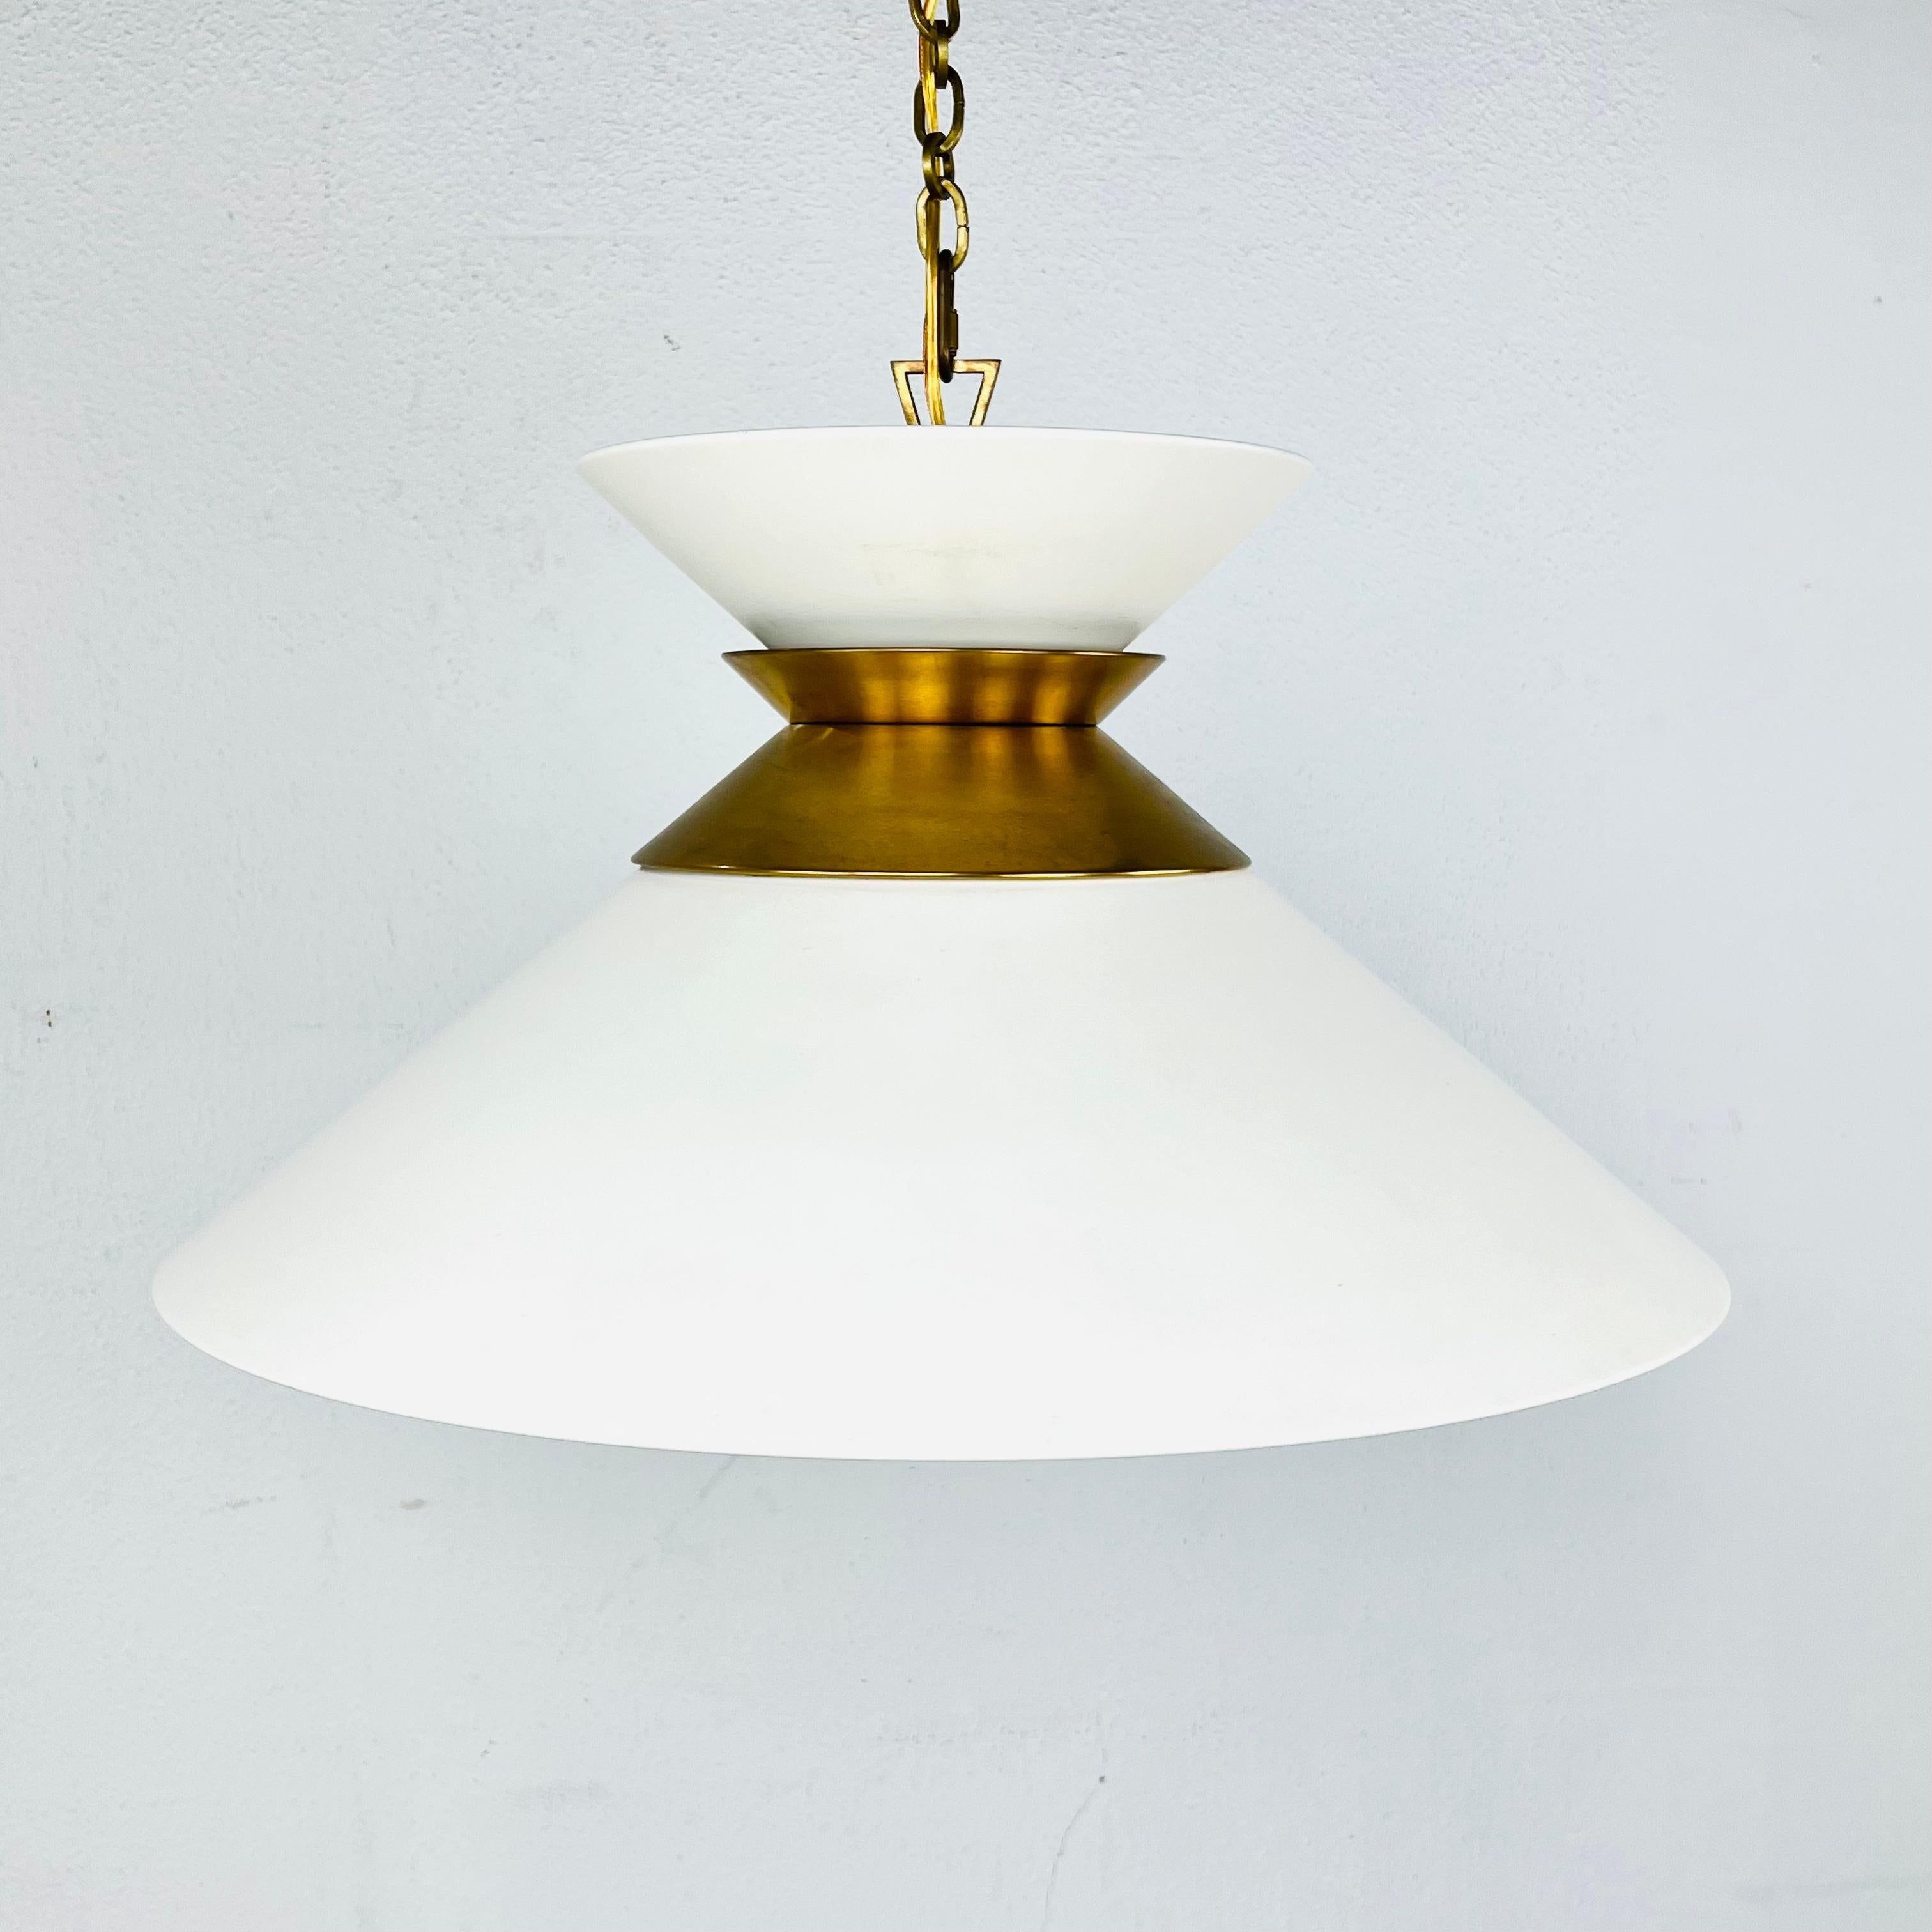 A dramatic new rendition of the classic barn light! This large stacked pendant by Visual Comfort Signature, formerly known as Visual Comfort, blends sharp angles with an open shade and sleeve and collar frame to create visual interest while